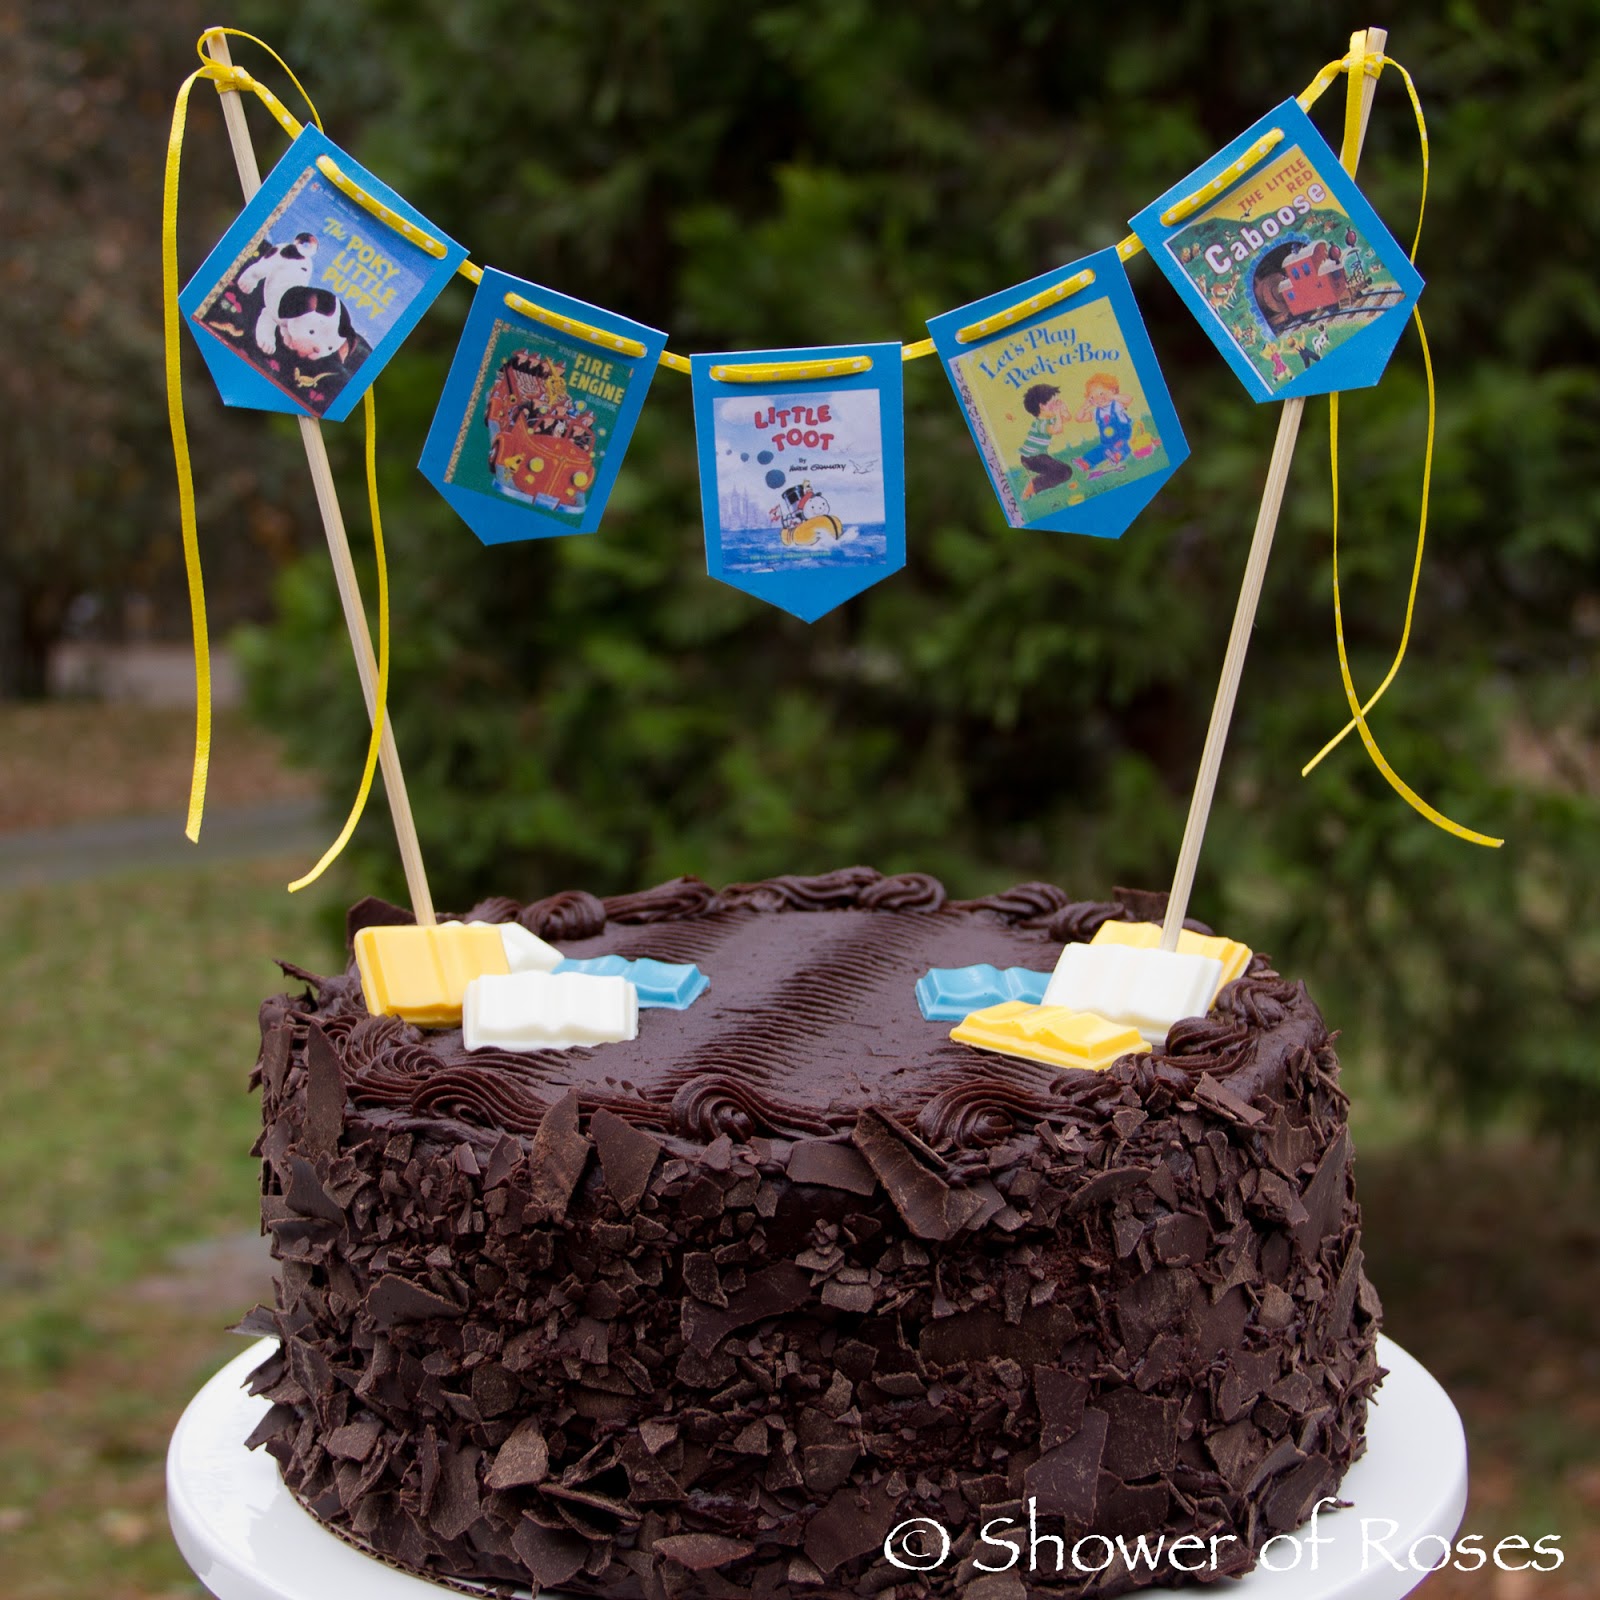 Crafting Jungle Book Magic: Introducing our Jungle Book Themed Cake